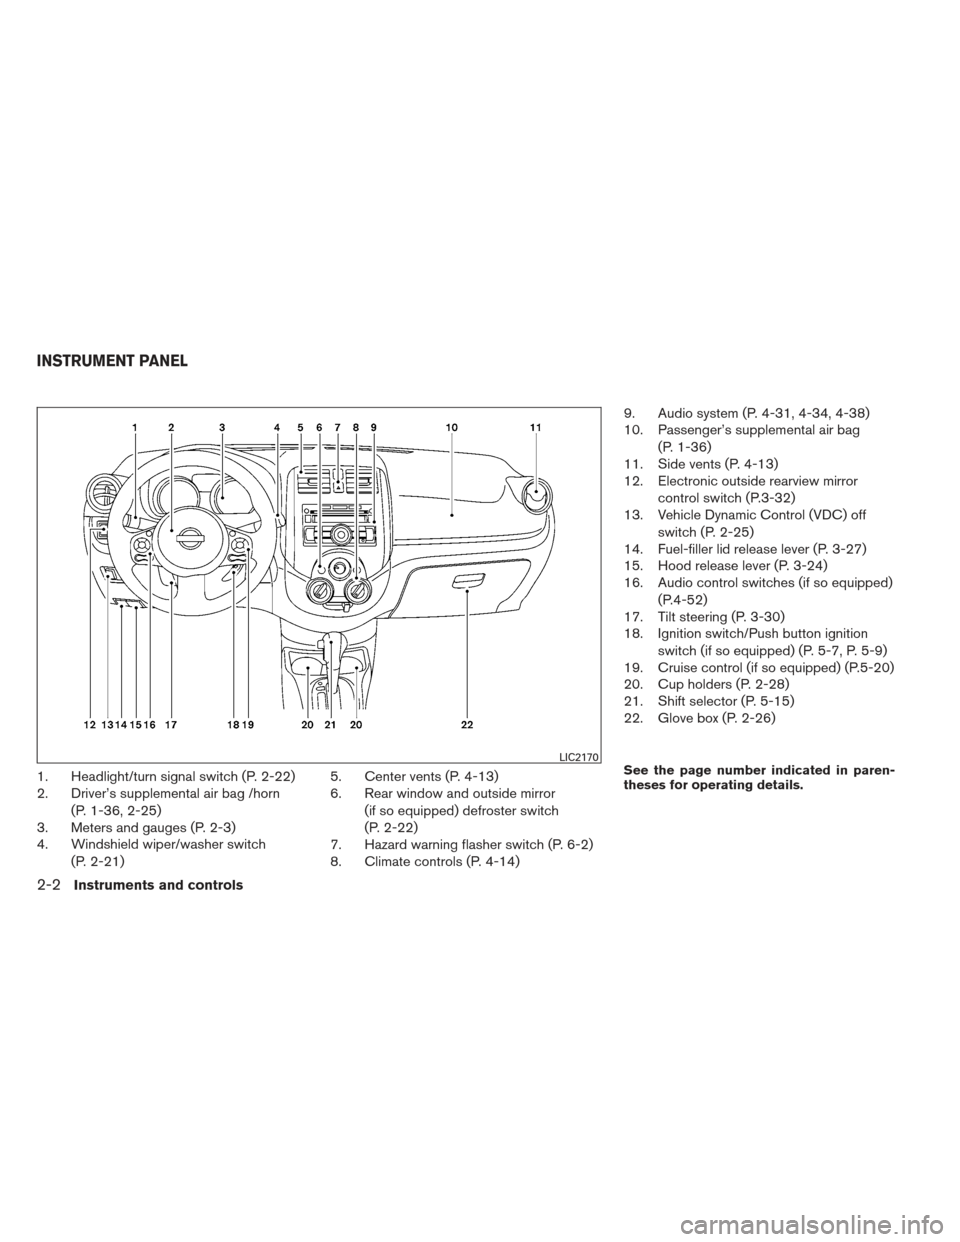 NISSAN VERSA SEDAN 2013 2.G Manual PDF 1. Headlight/turn signal switch (P. 2-22)
2. Driver’s supplemental air bag /horn(P. 1-36, 2-25)
3. Meters and gauges (P. 2-3)
4. Windshield wiper/washer switch
(P. 2-21) 5. Center vents (P. 4-13)
6.